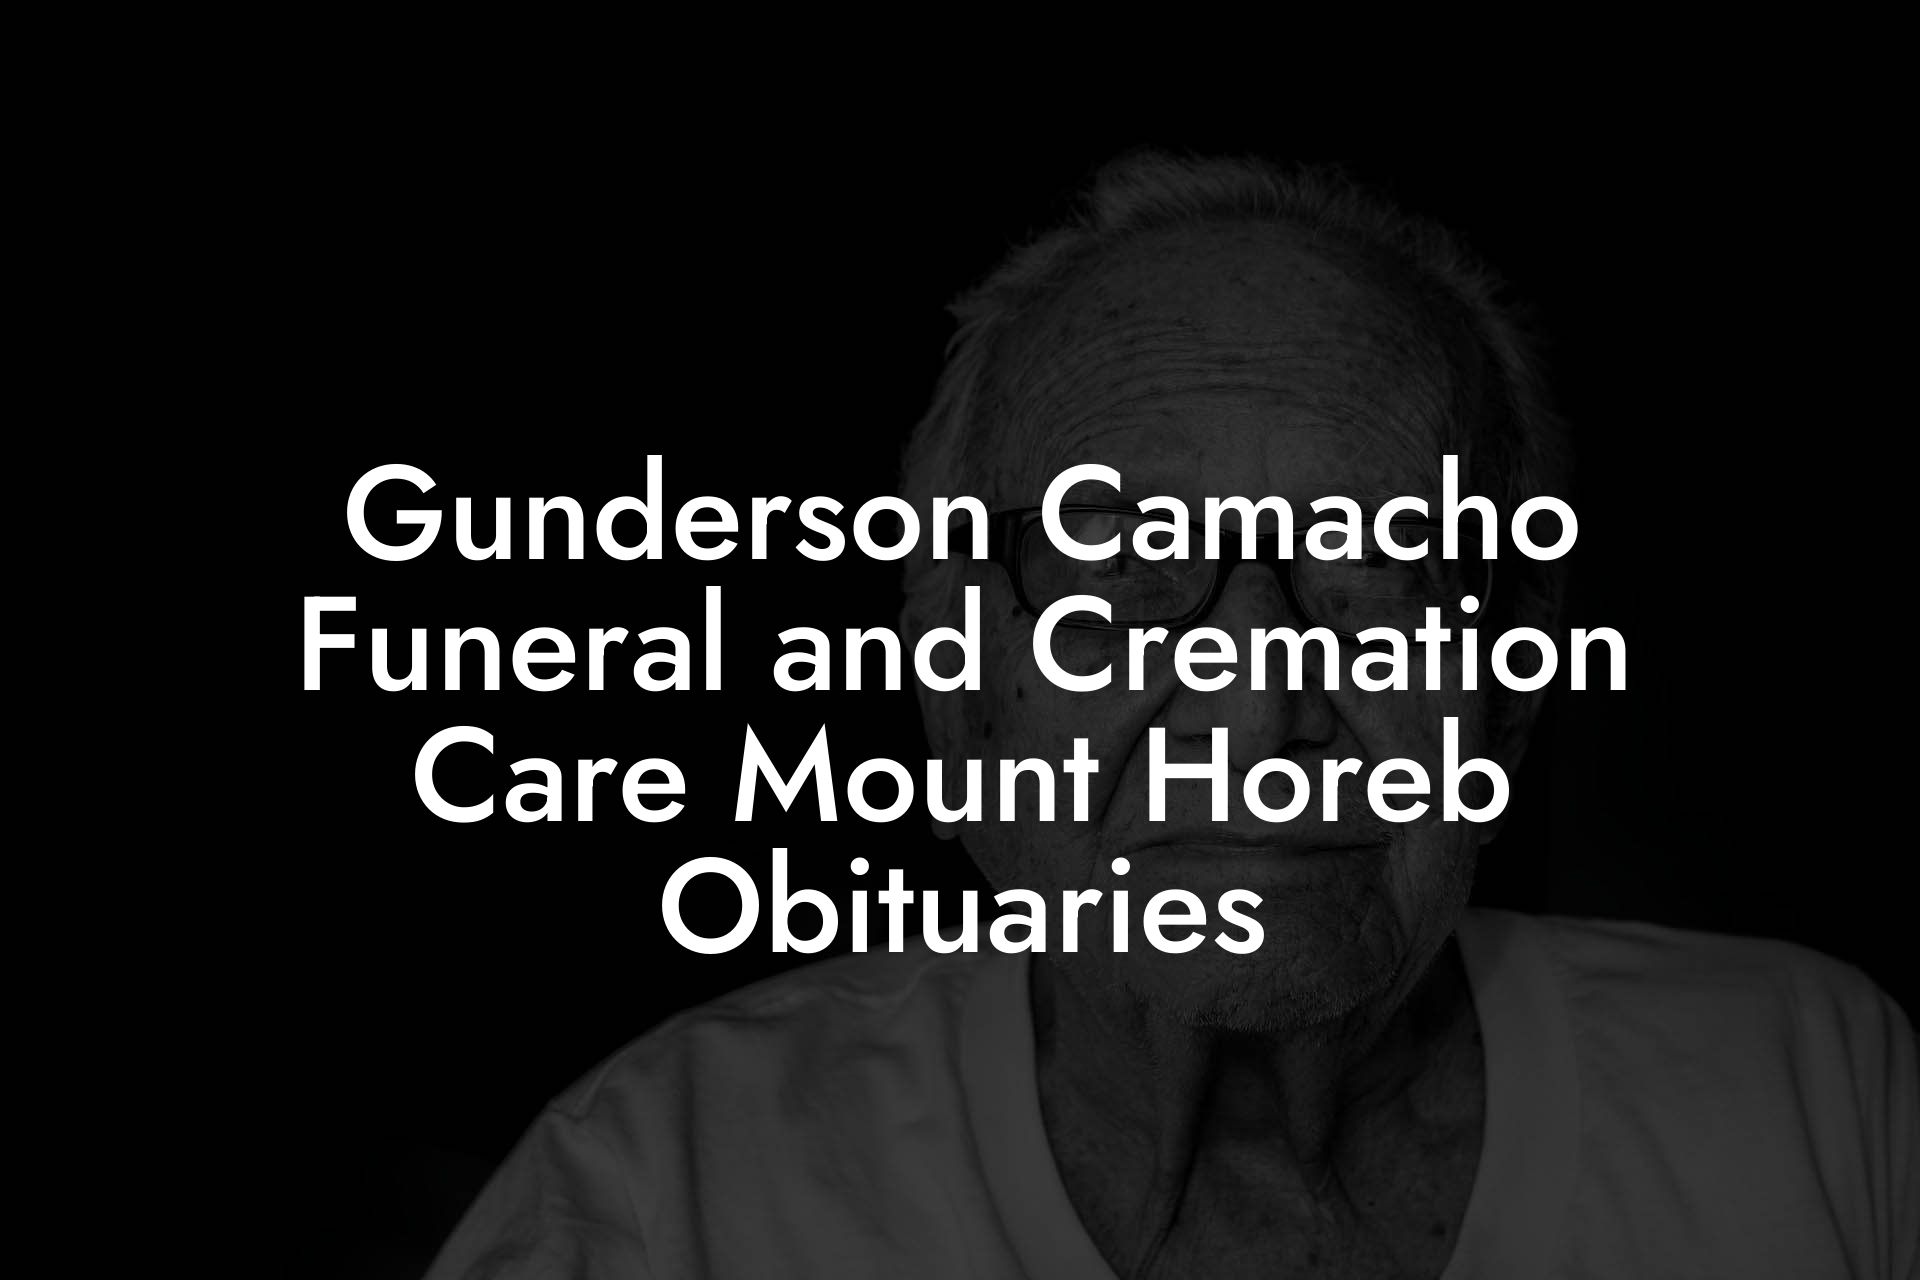 Gunderson Camacho Funeral and Cremation Care Mount Horeb Obituaries